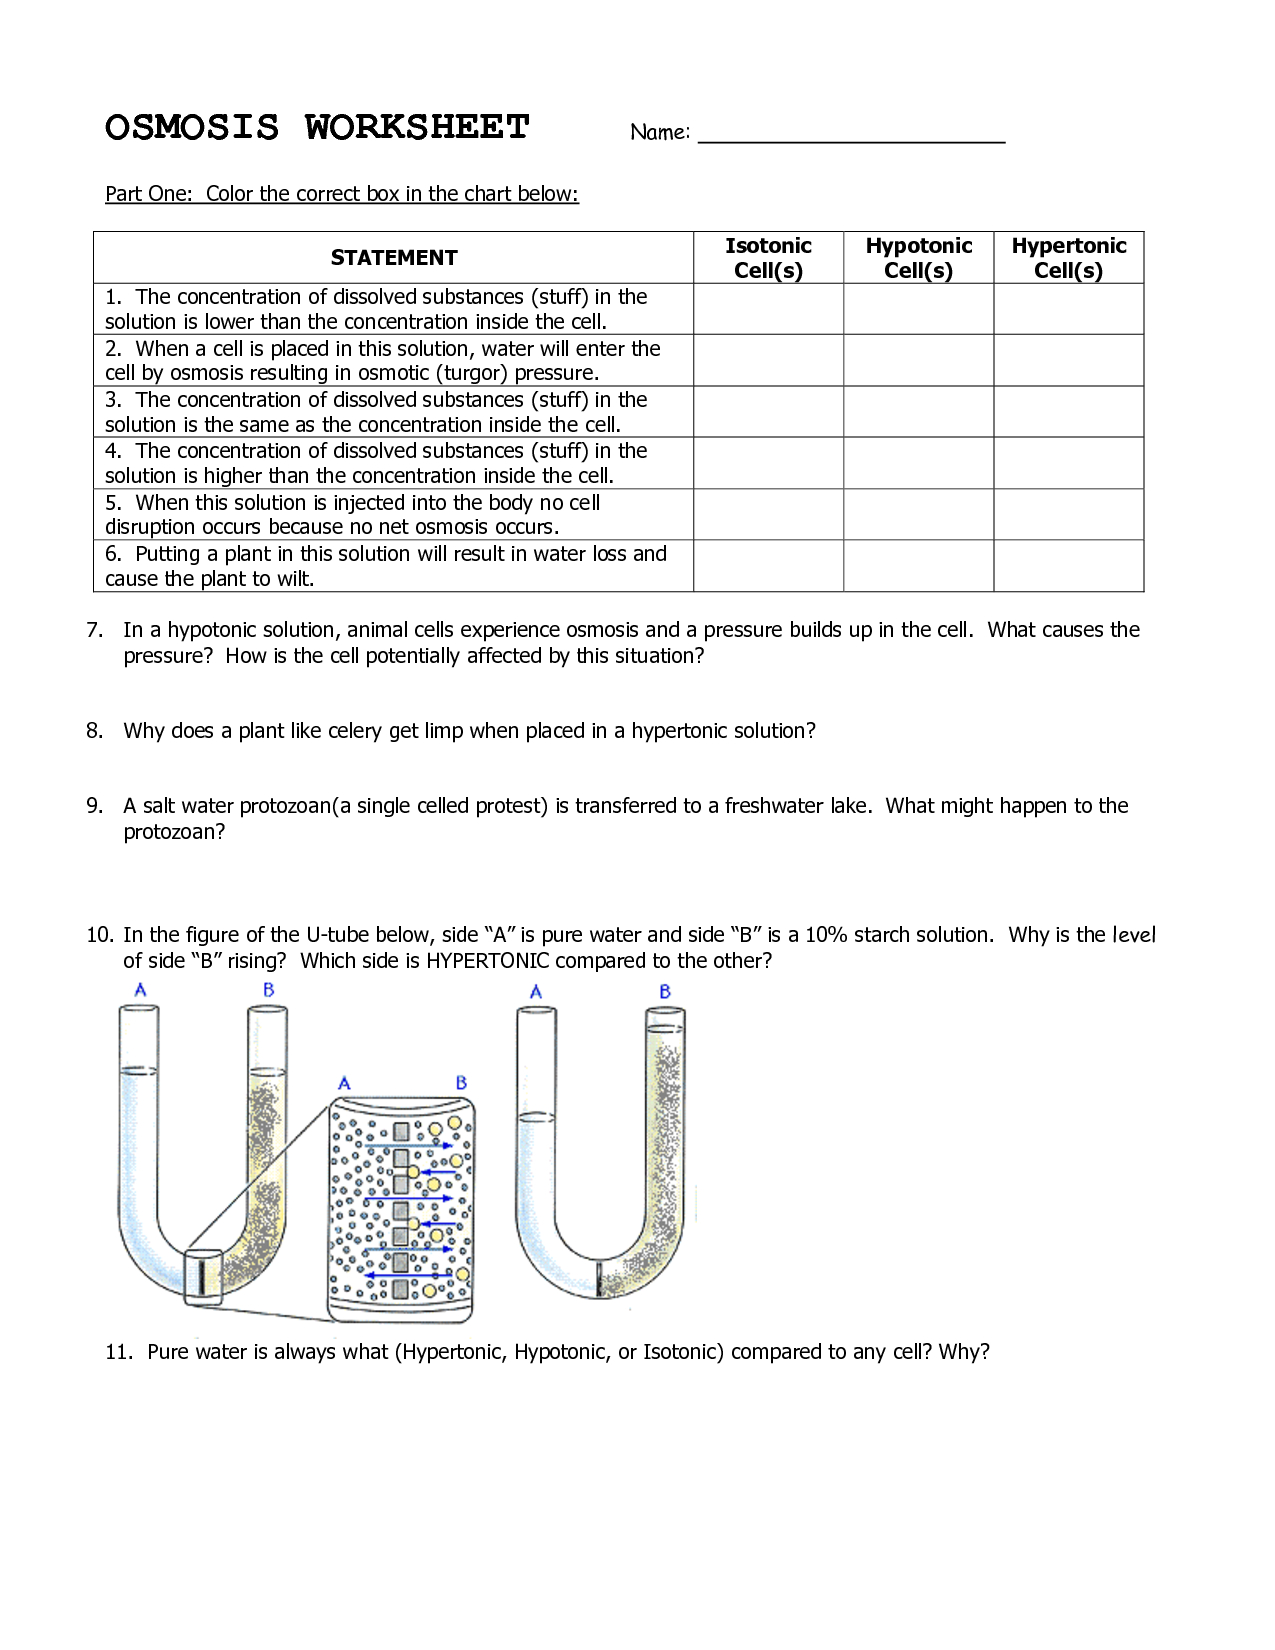 osmosis-and-tonicity-worksheet-db-excel